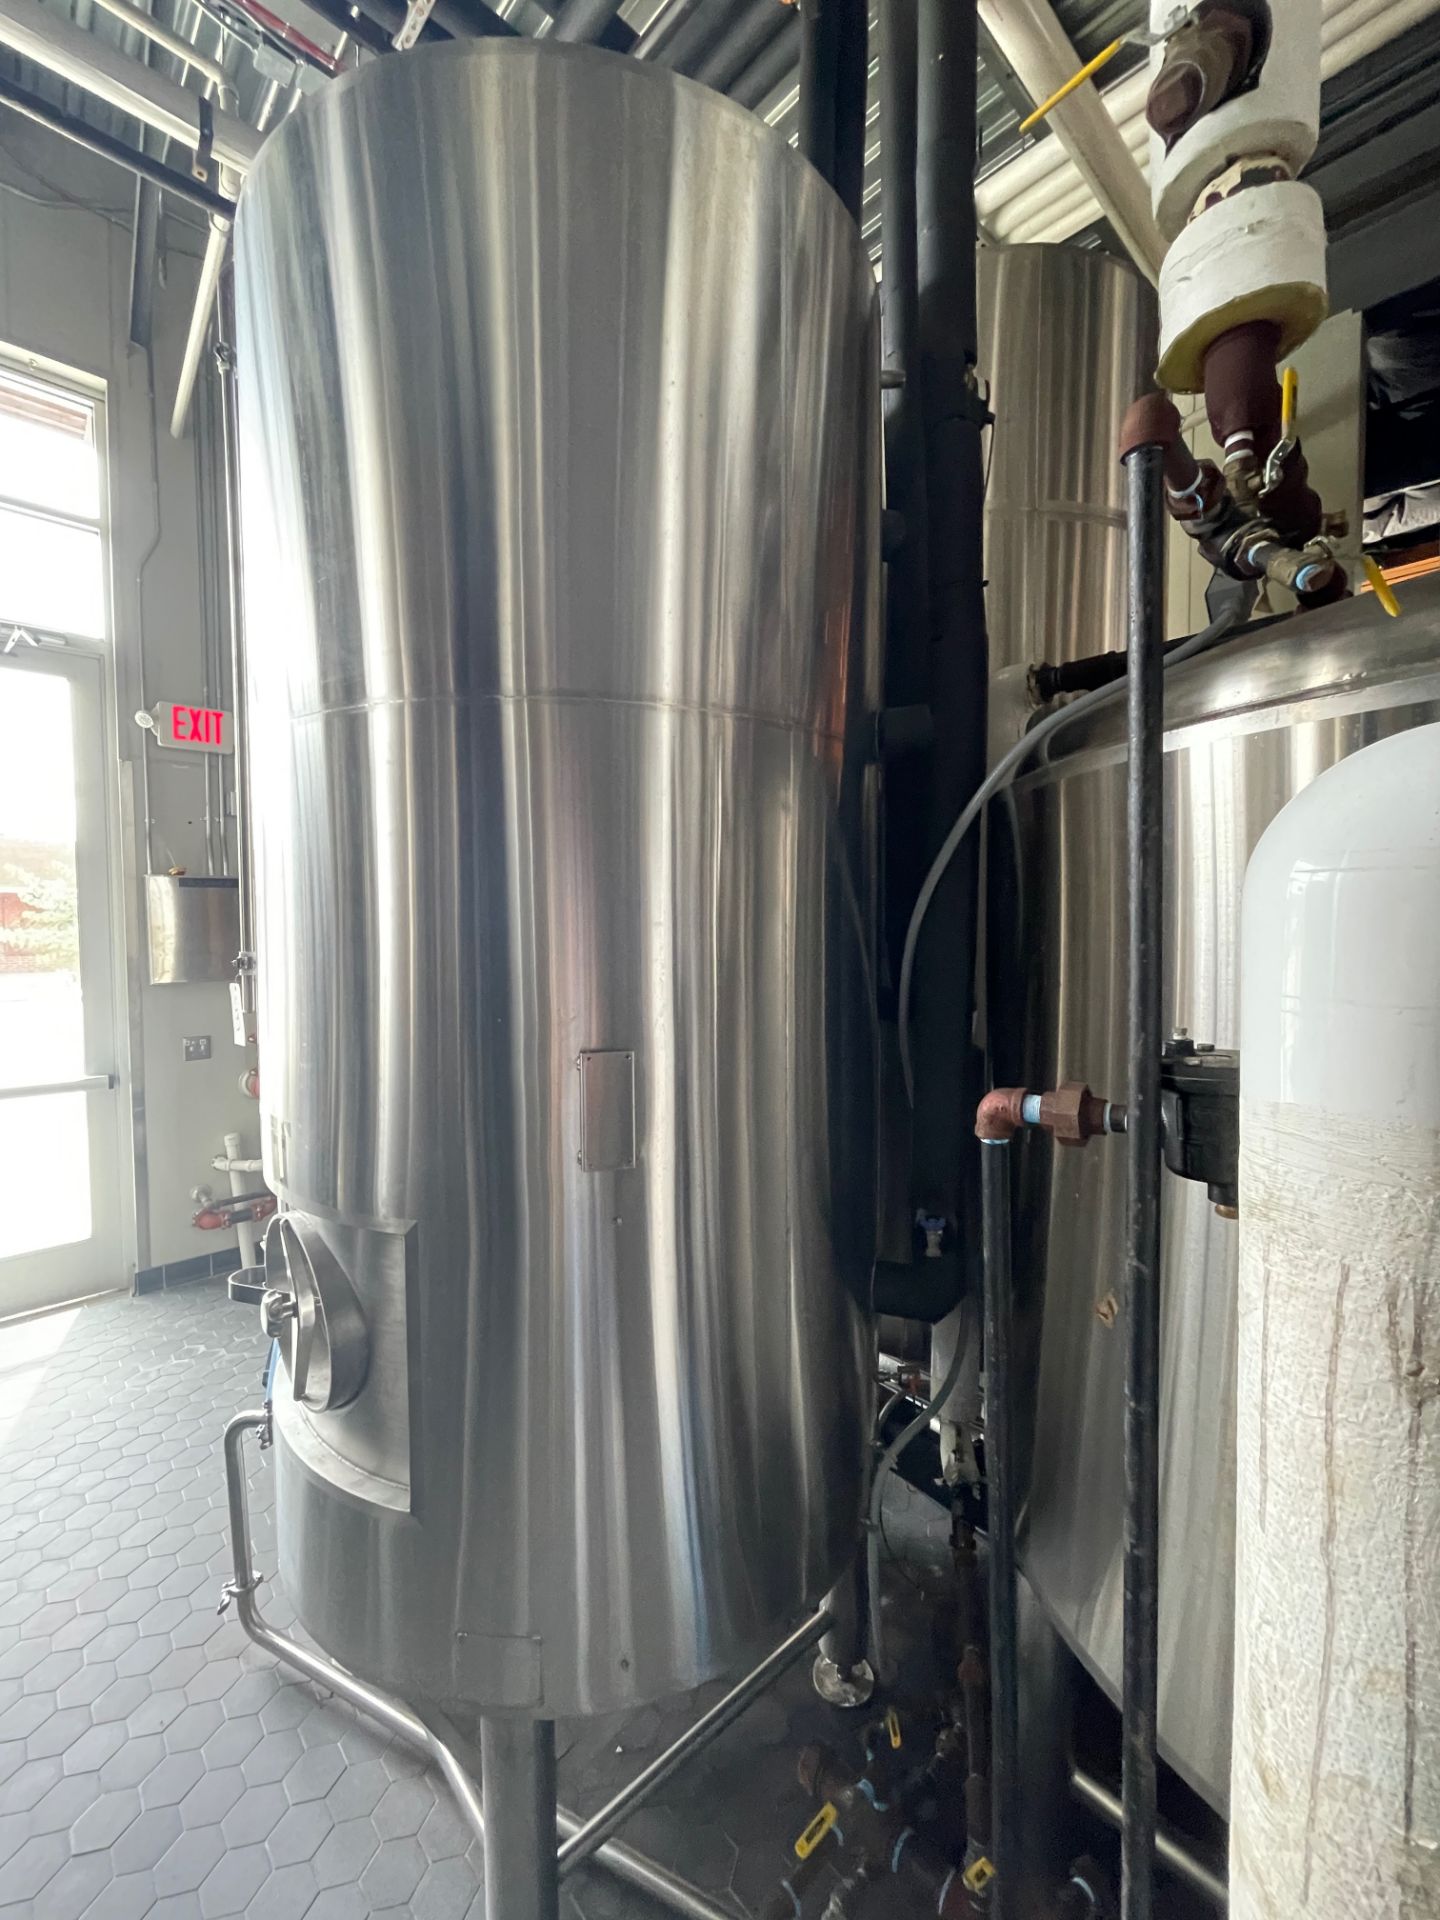 2016 Specific Mechanical 22.5 BBL Cold Liquor Tank, Glycol Jacket - Subj to Bulk | Rig Fee: $1000 - Image 2 of 5